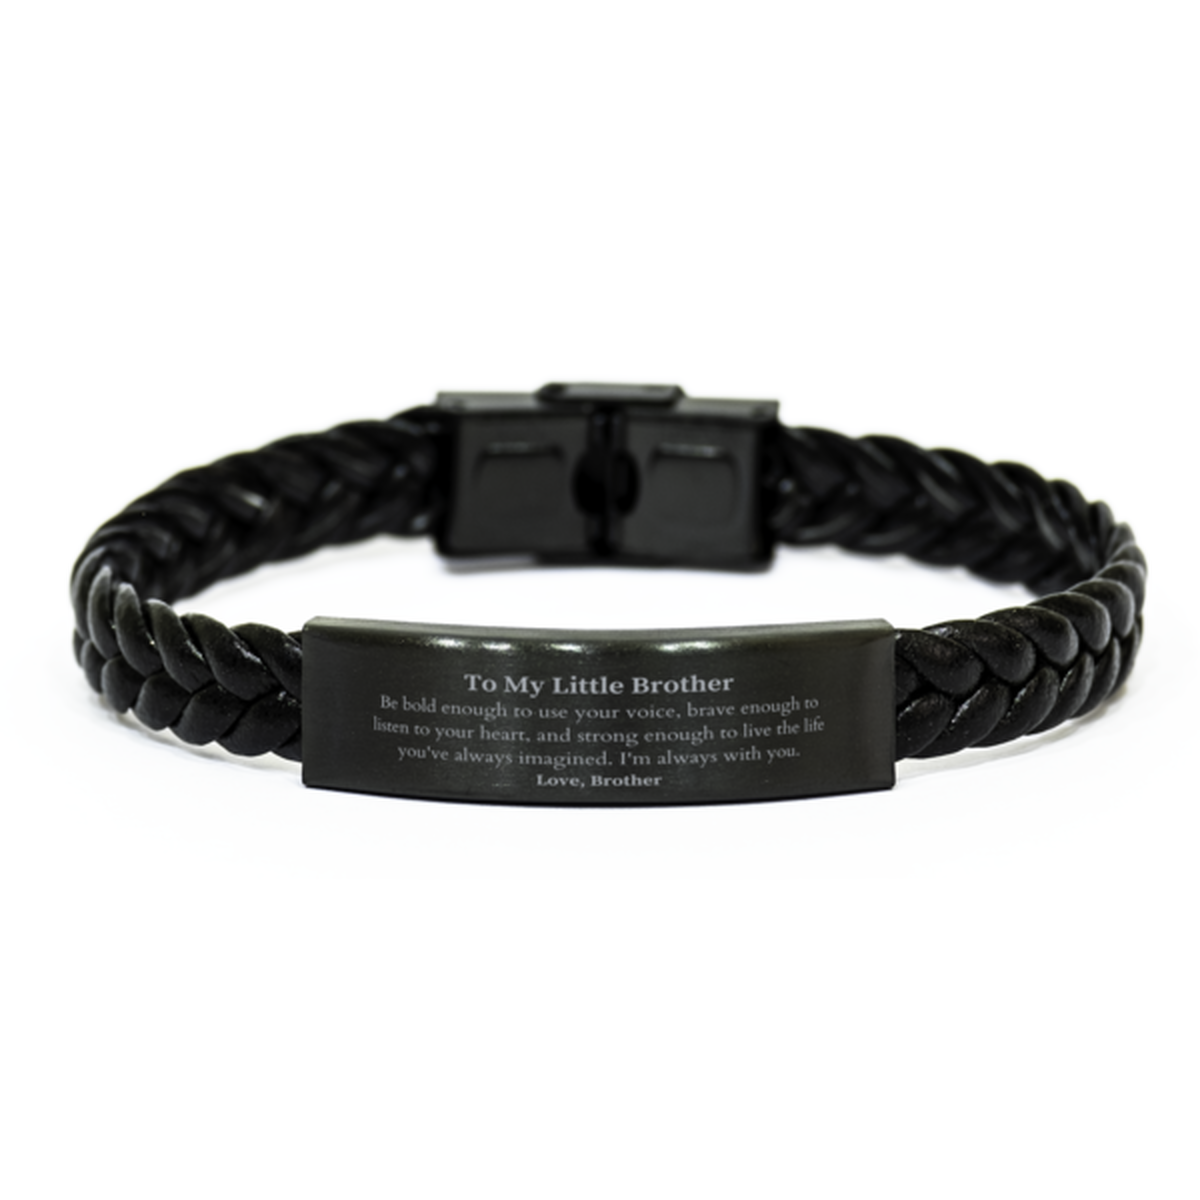 Keepsake Little Brother Braided Leather Bracelet Gift Idea Graduation Christmas Birthday Little Brother from Brother, Little Brother Be bold enough to use your voice, brave enough to listen to your heart. Love, Brother